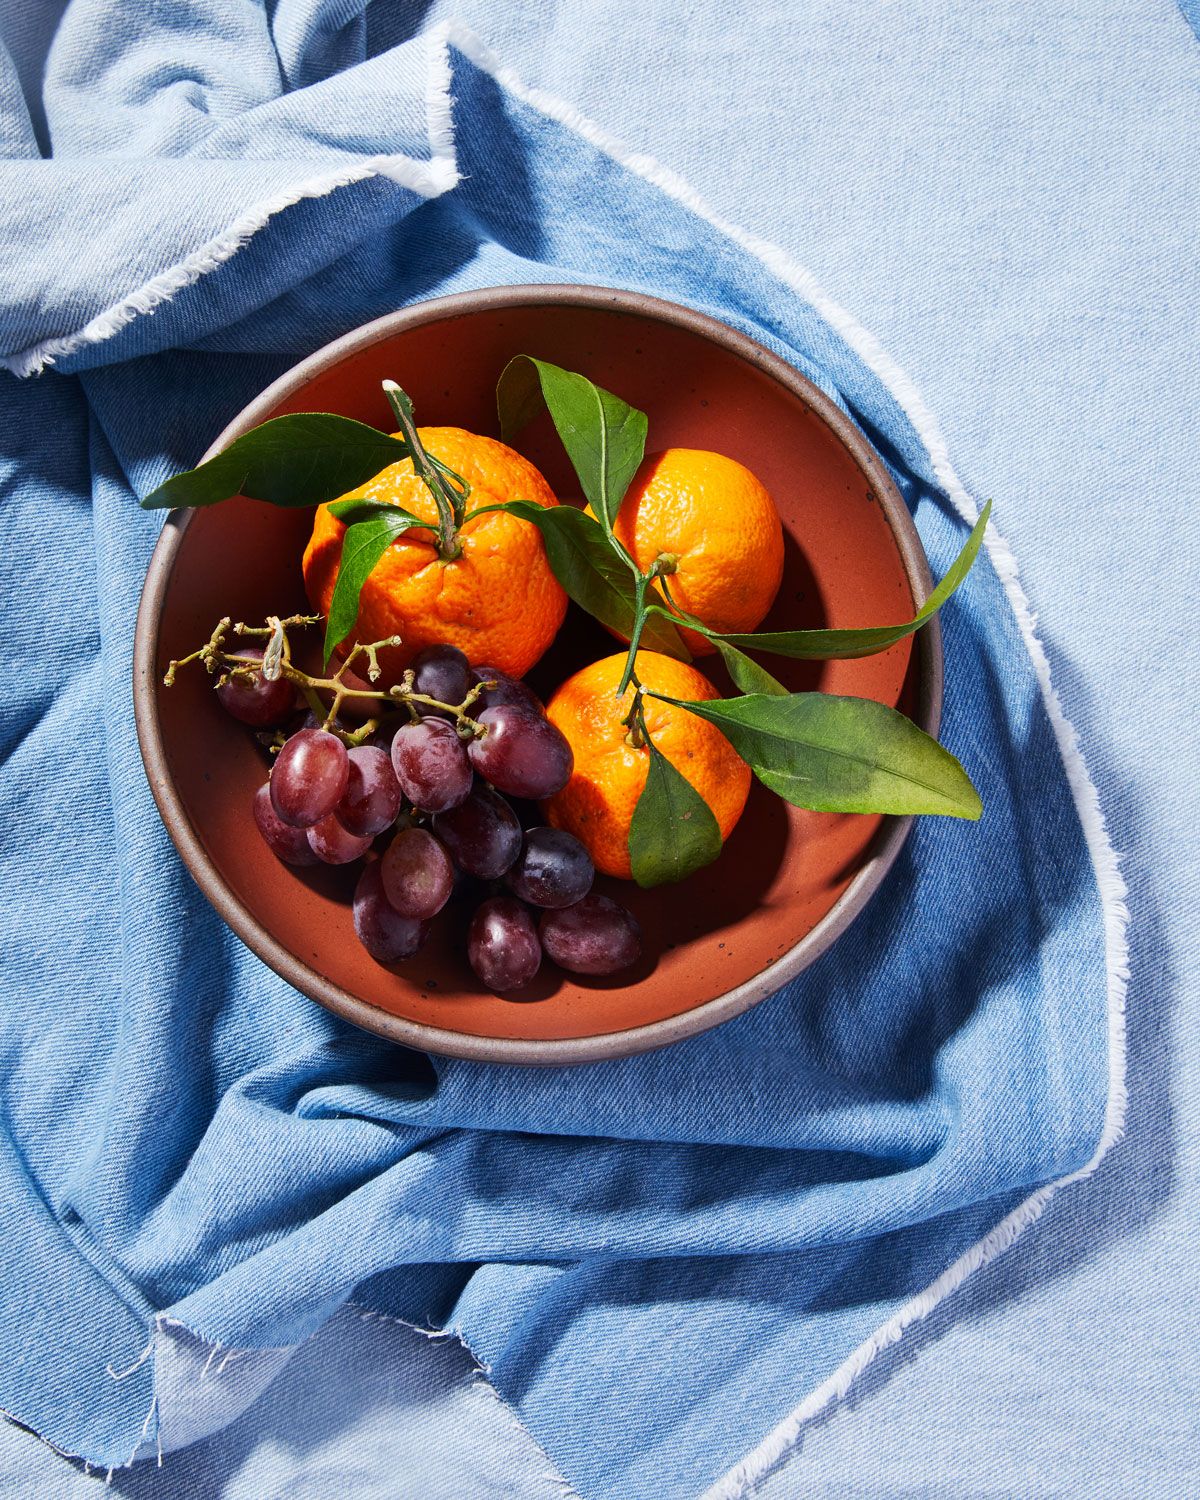 Oranges and grapes in an Amaro bowl on a light blue towel